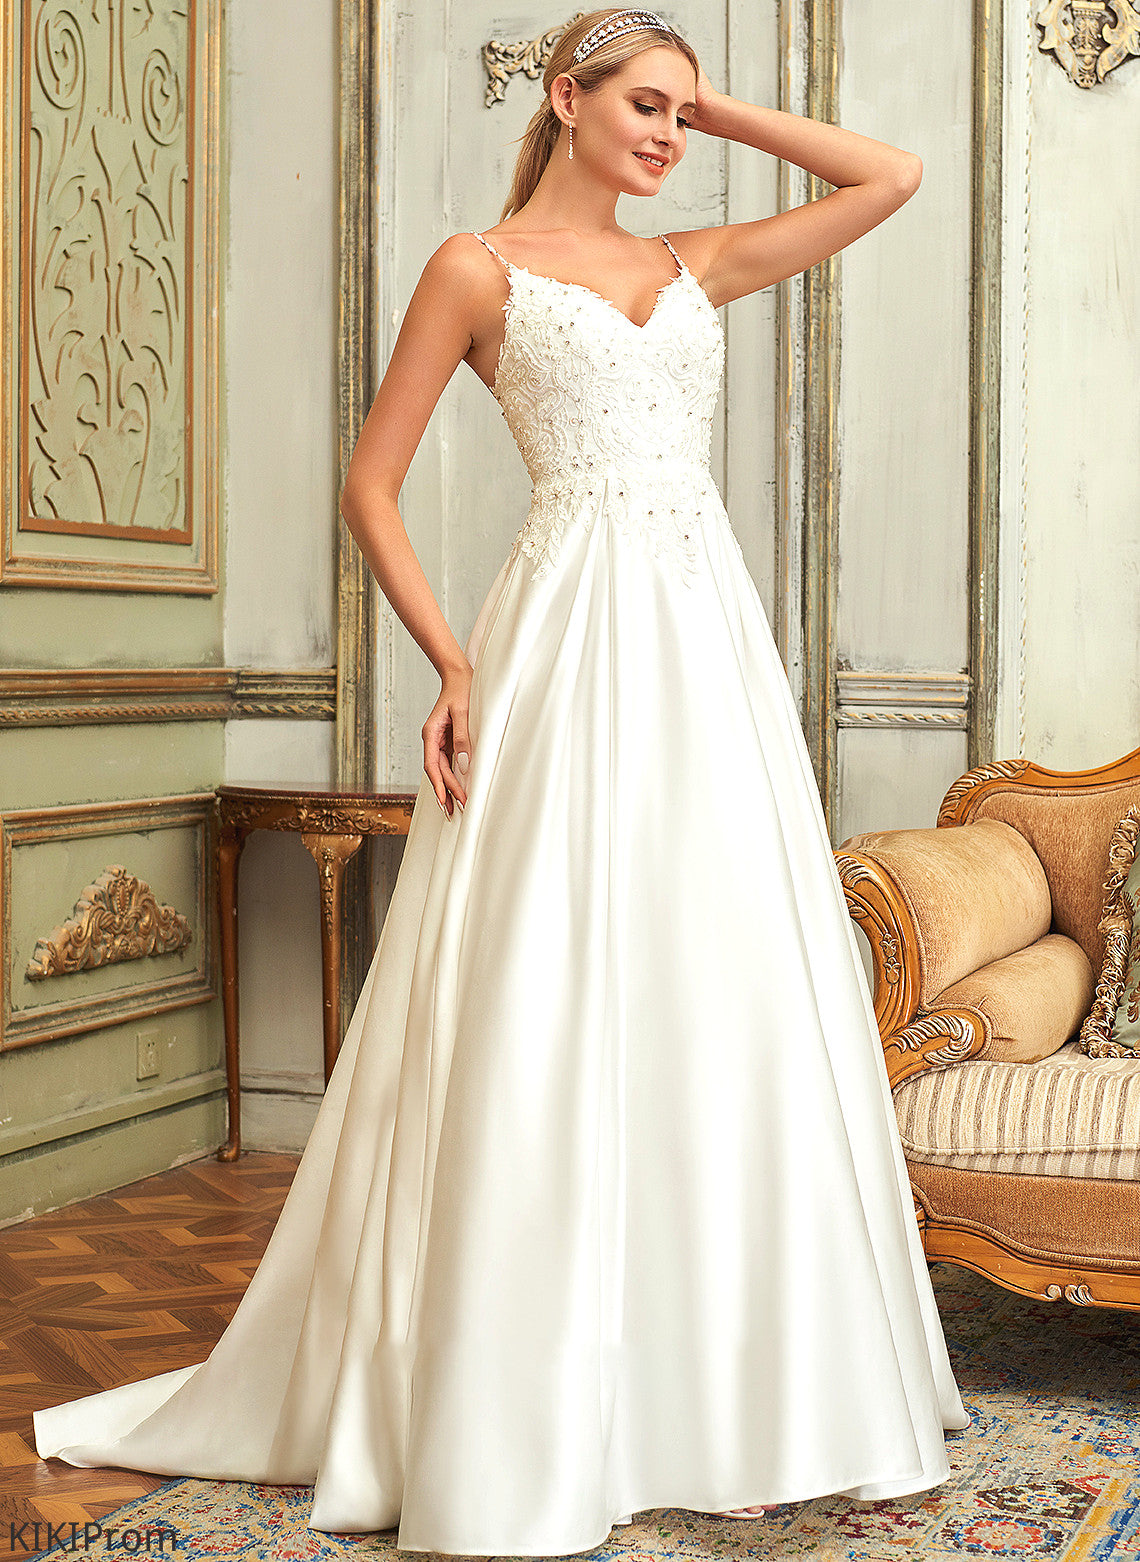 Sweep Pockets Beading Lace Ball-Gown/Princess Wedding Train With Satin Lace Sarahi V-neck Sequins Dress Wedding Dresses